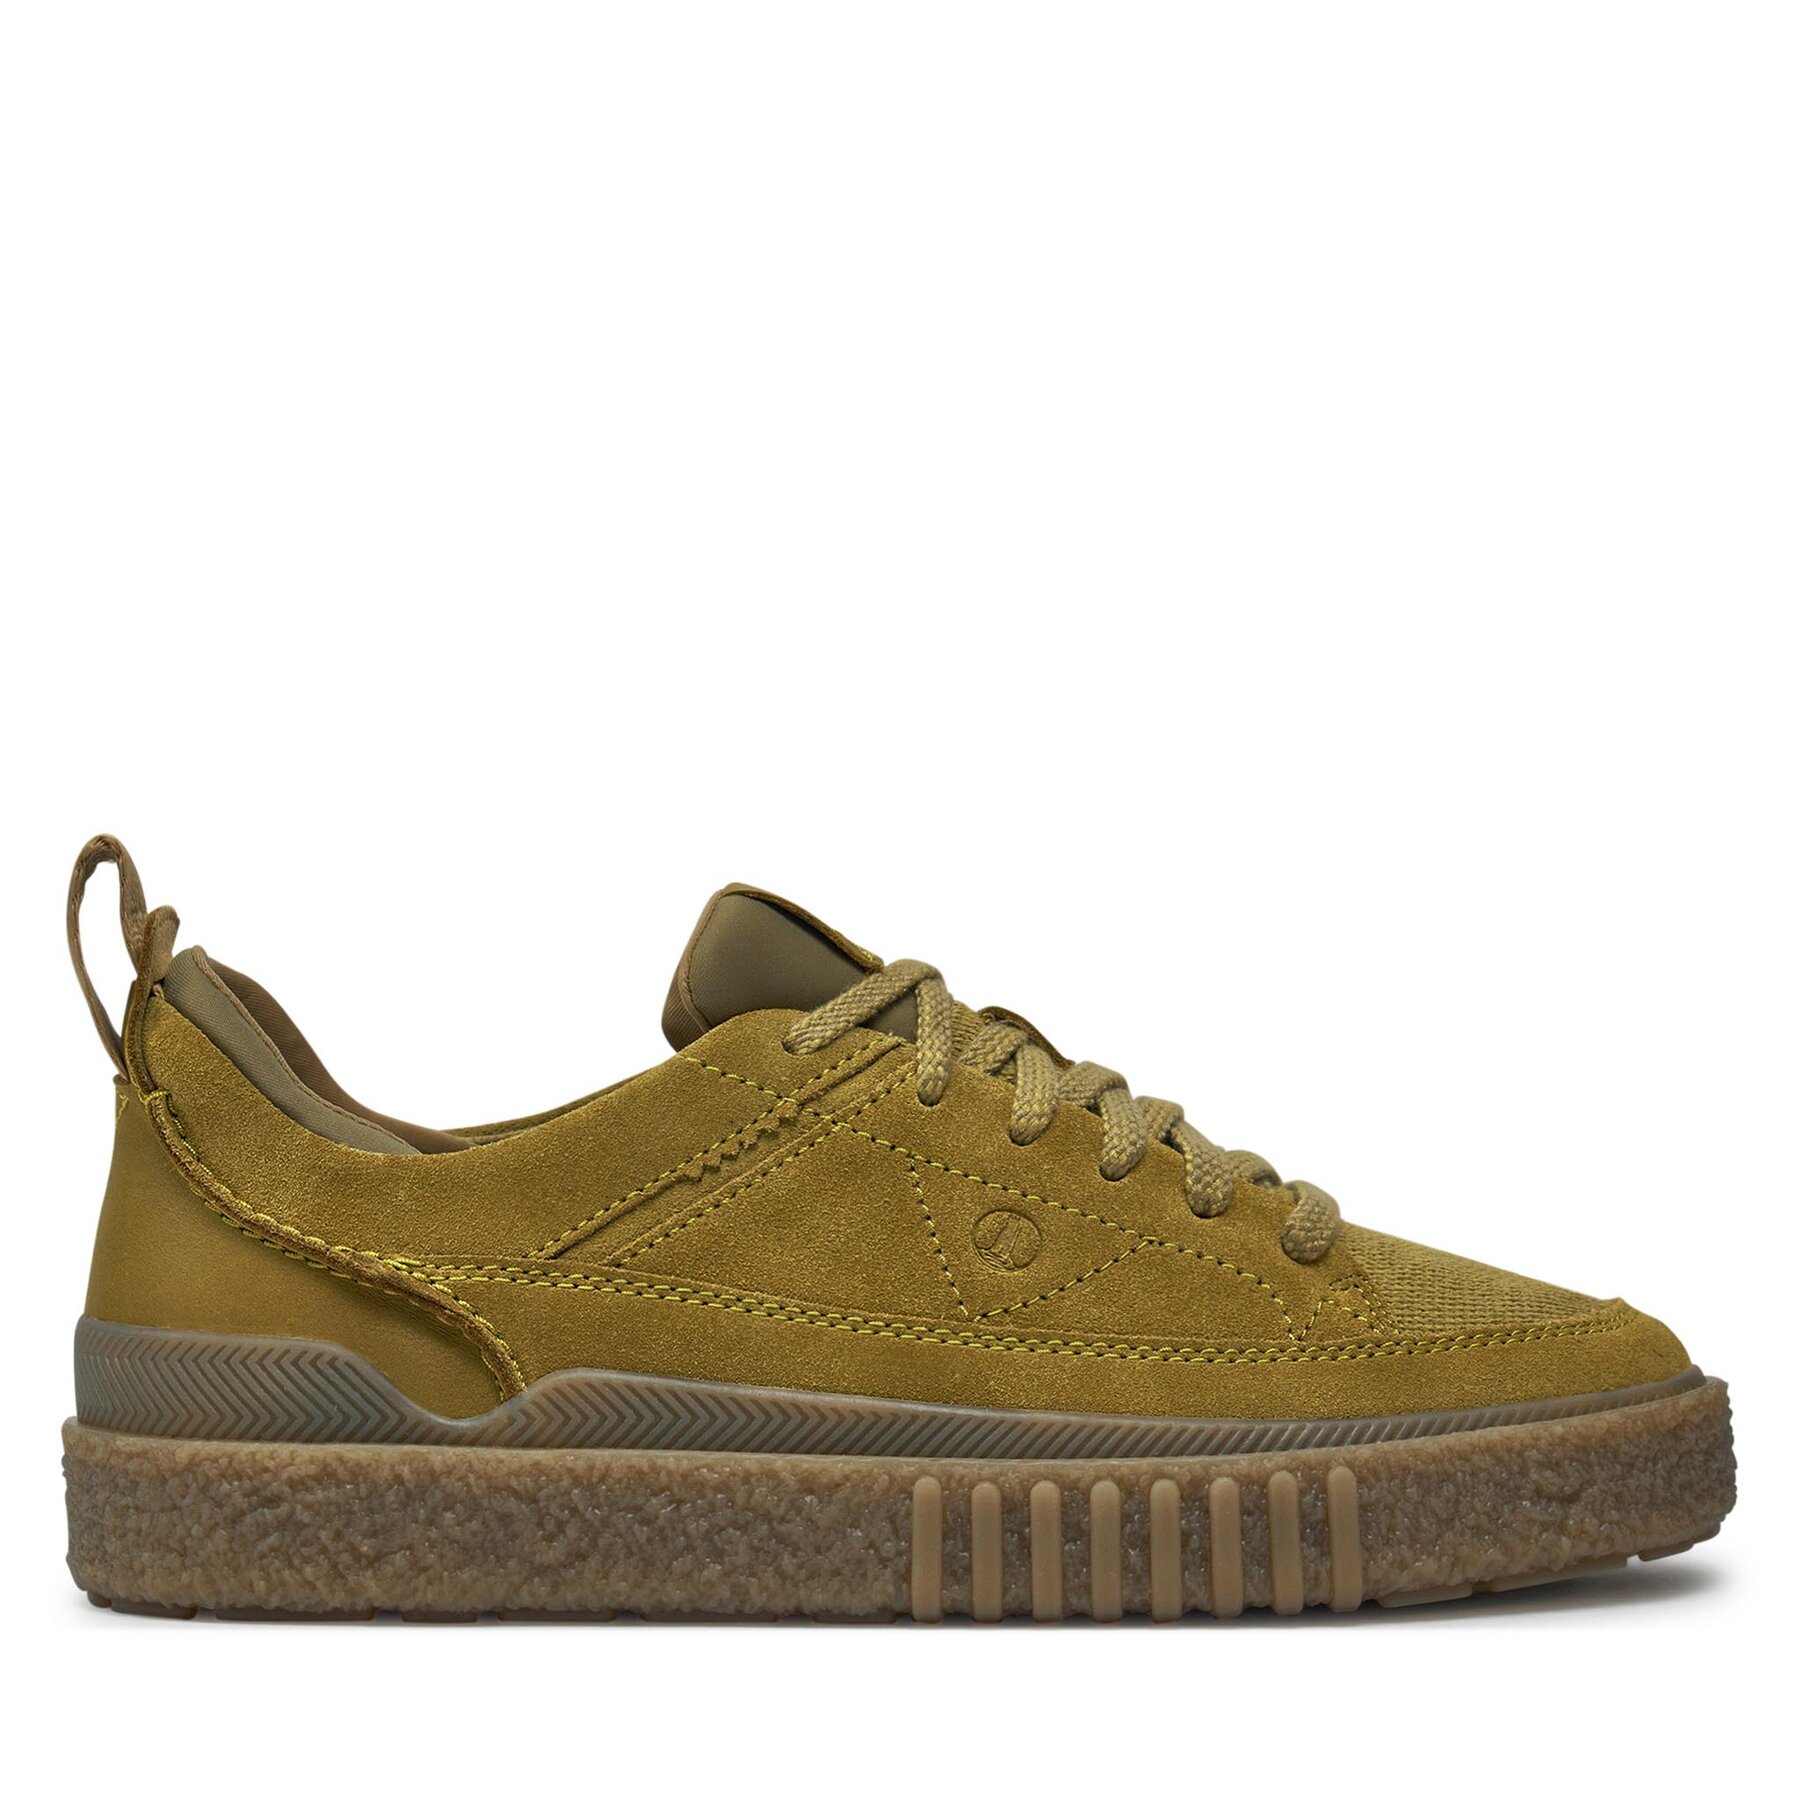 Sneakers Clarks Somerset Lace 26176184 Light Olive Sde von Clarks